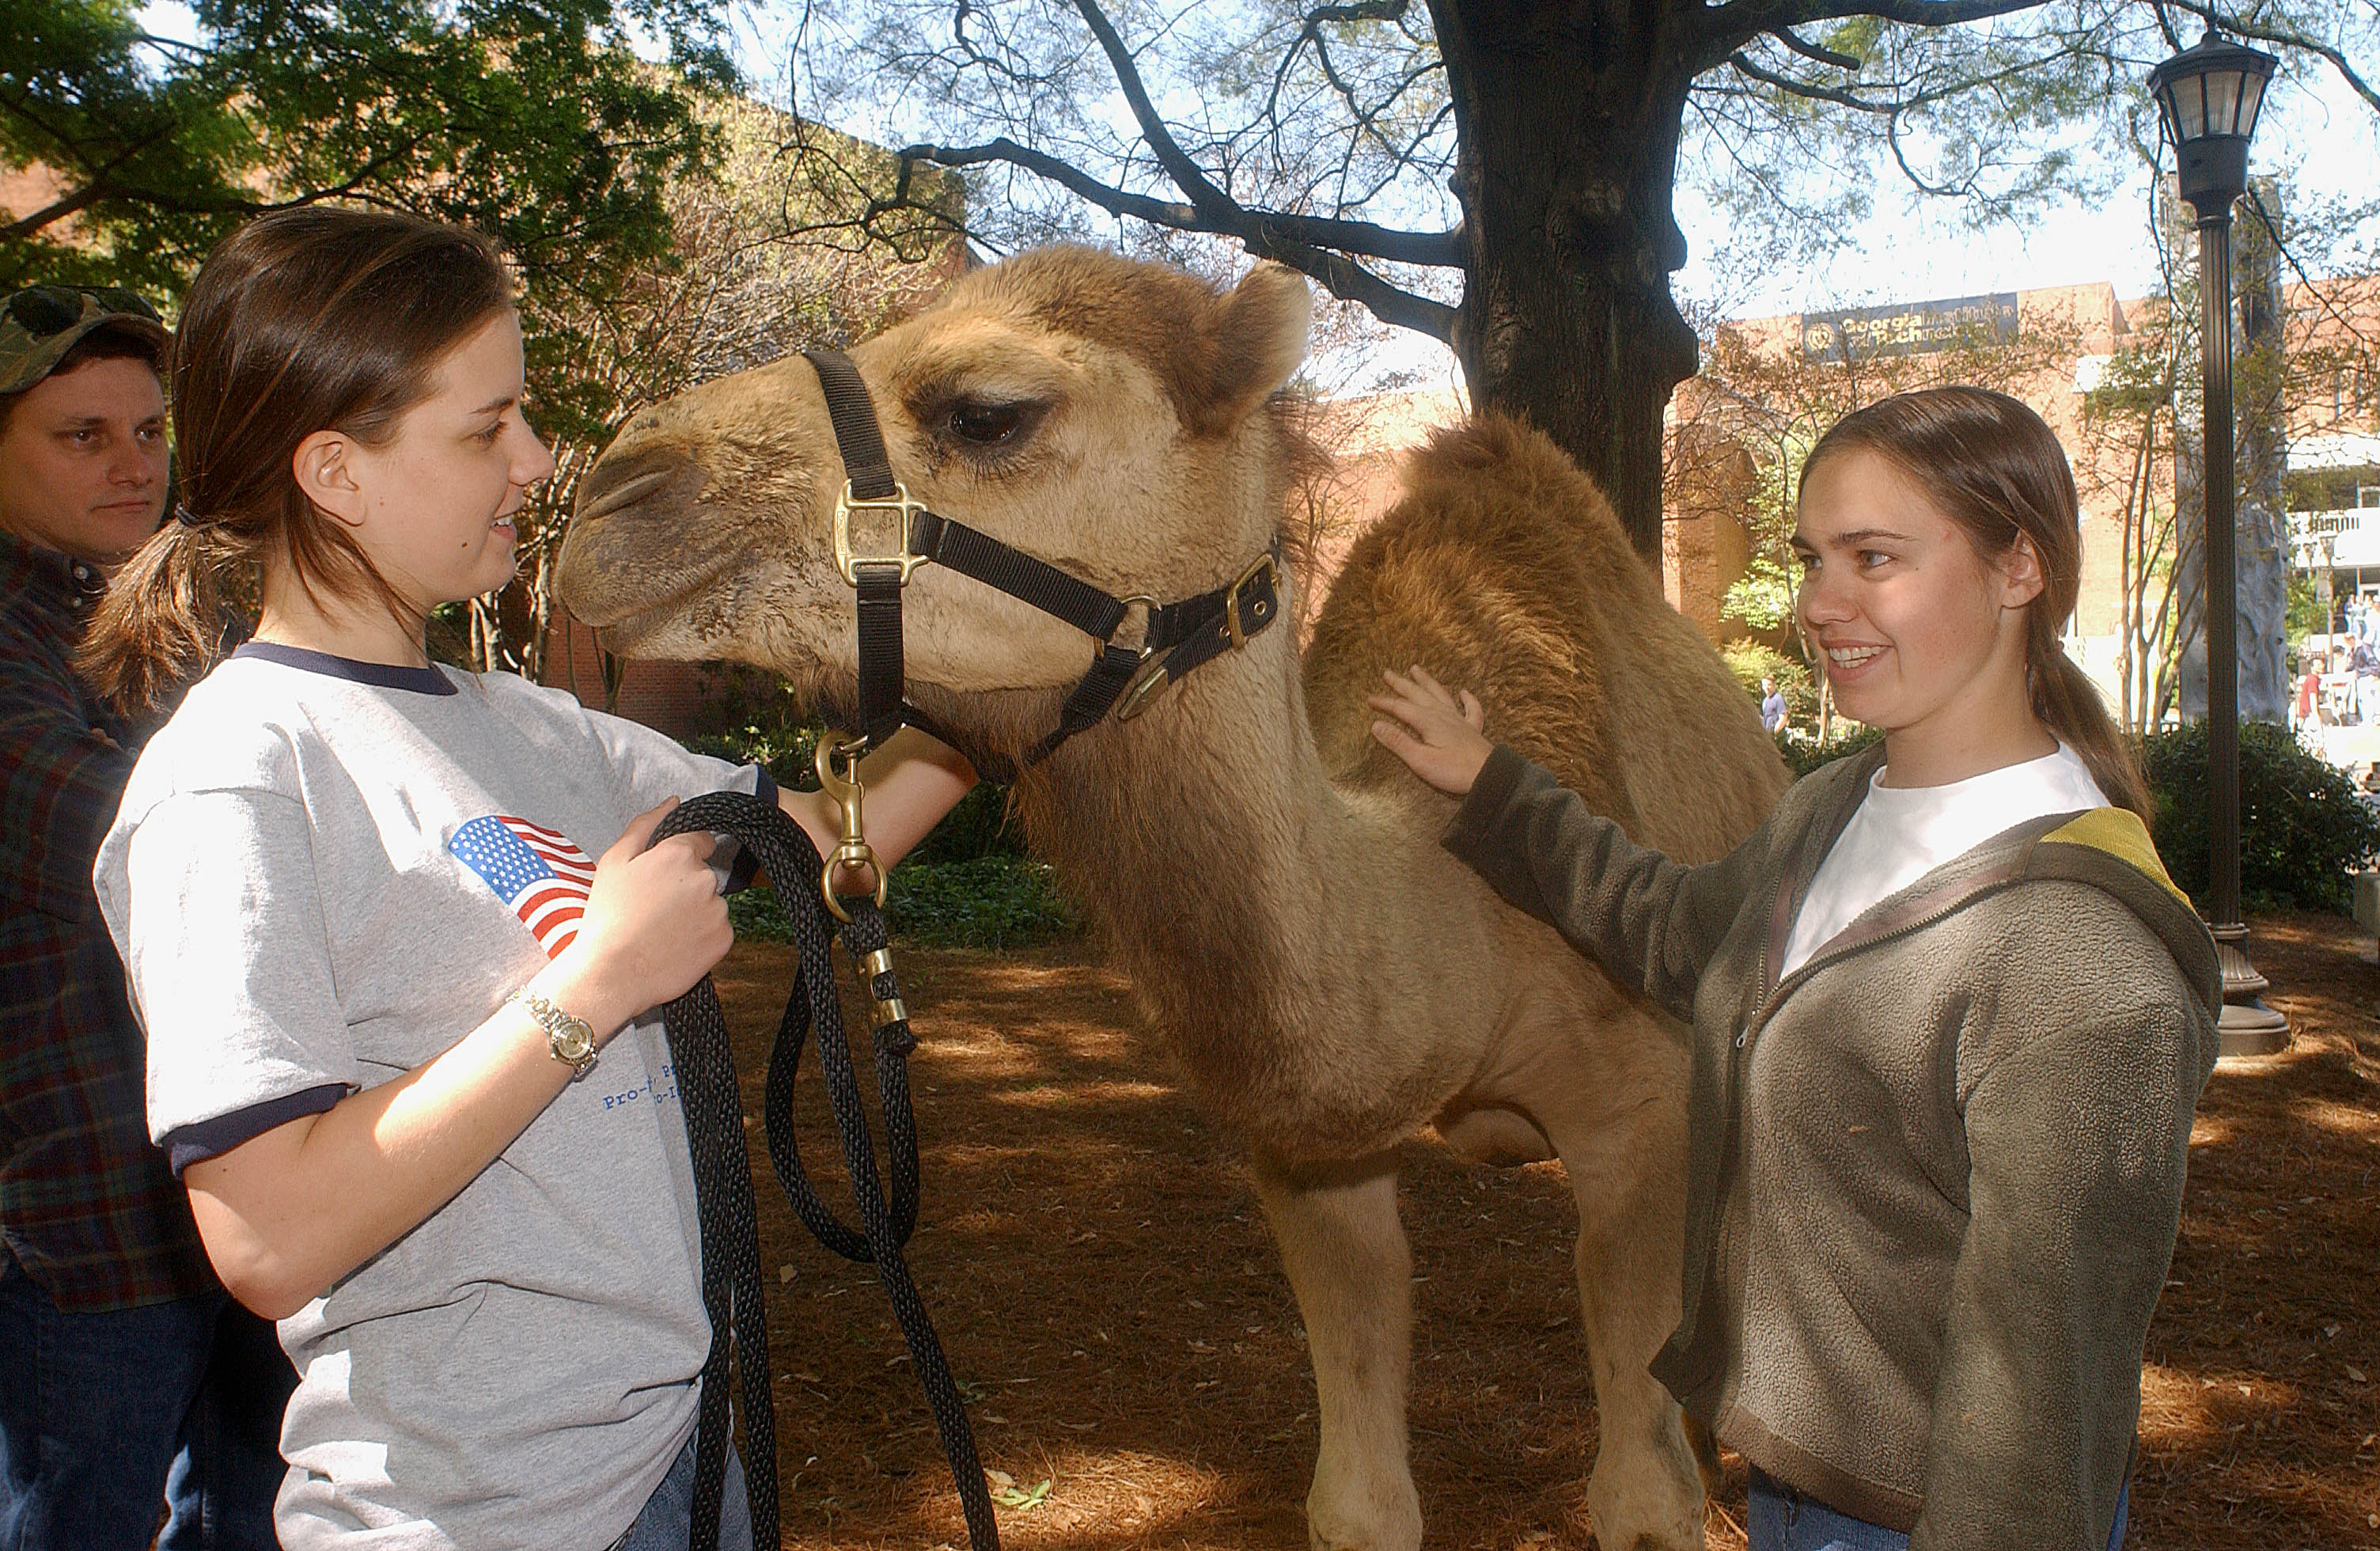 GT Hillel hosts Israel Fest each year to raise awareness about Israeli culture, including bringing a live camel to socialize with students.